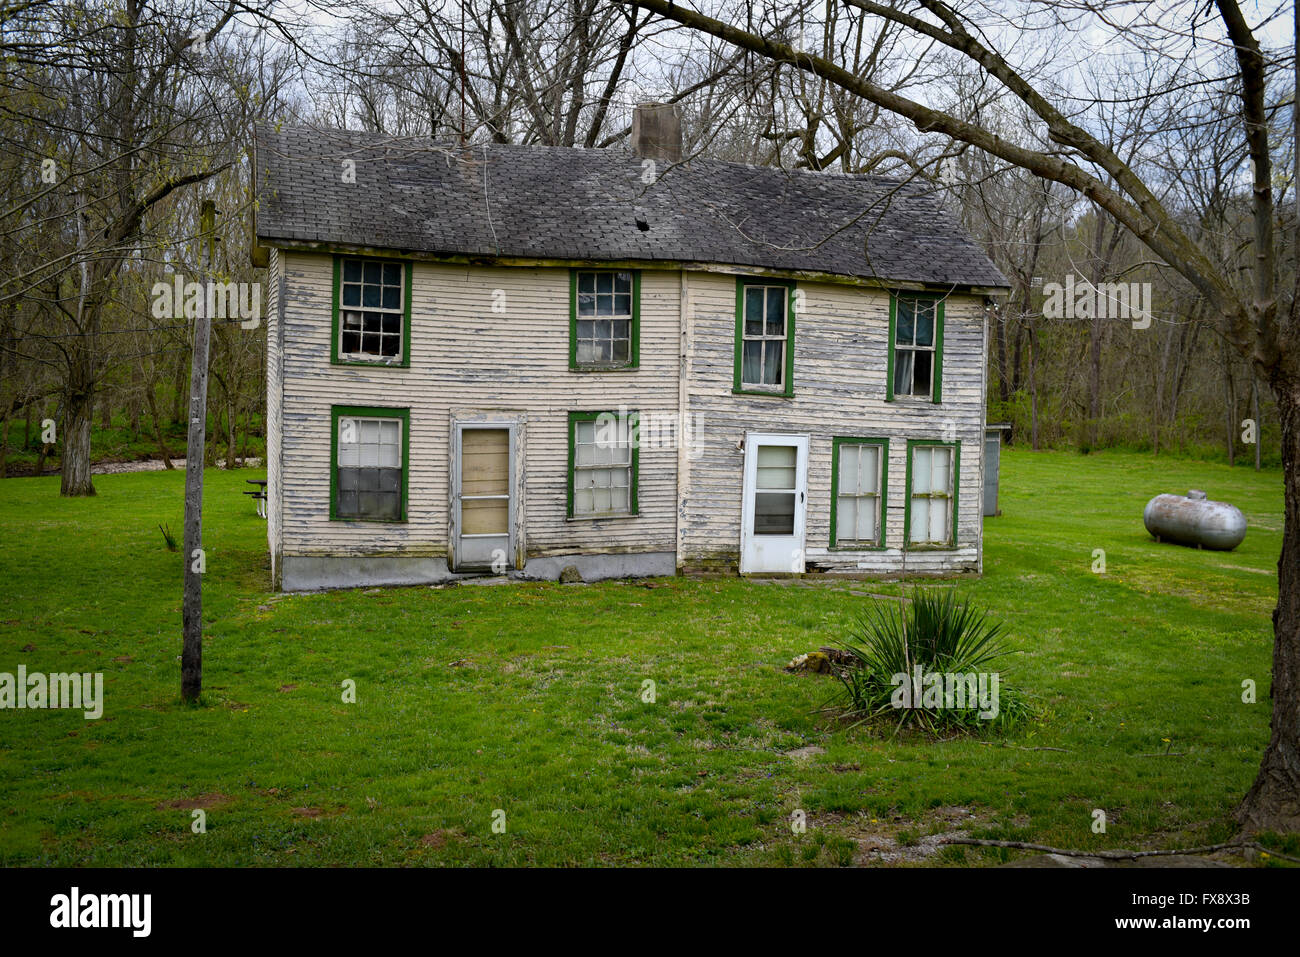 USA Kentucky KY an old dilapidated American home house no longer in use Stock Photo